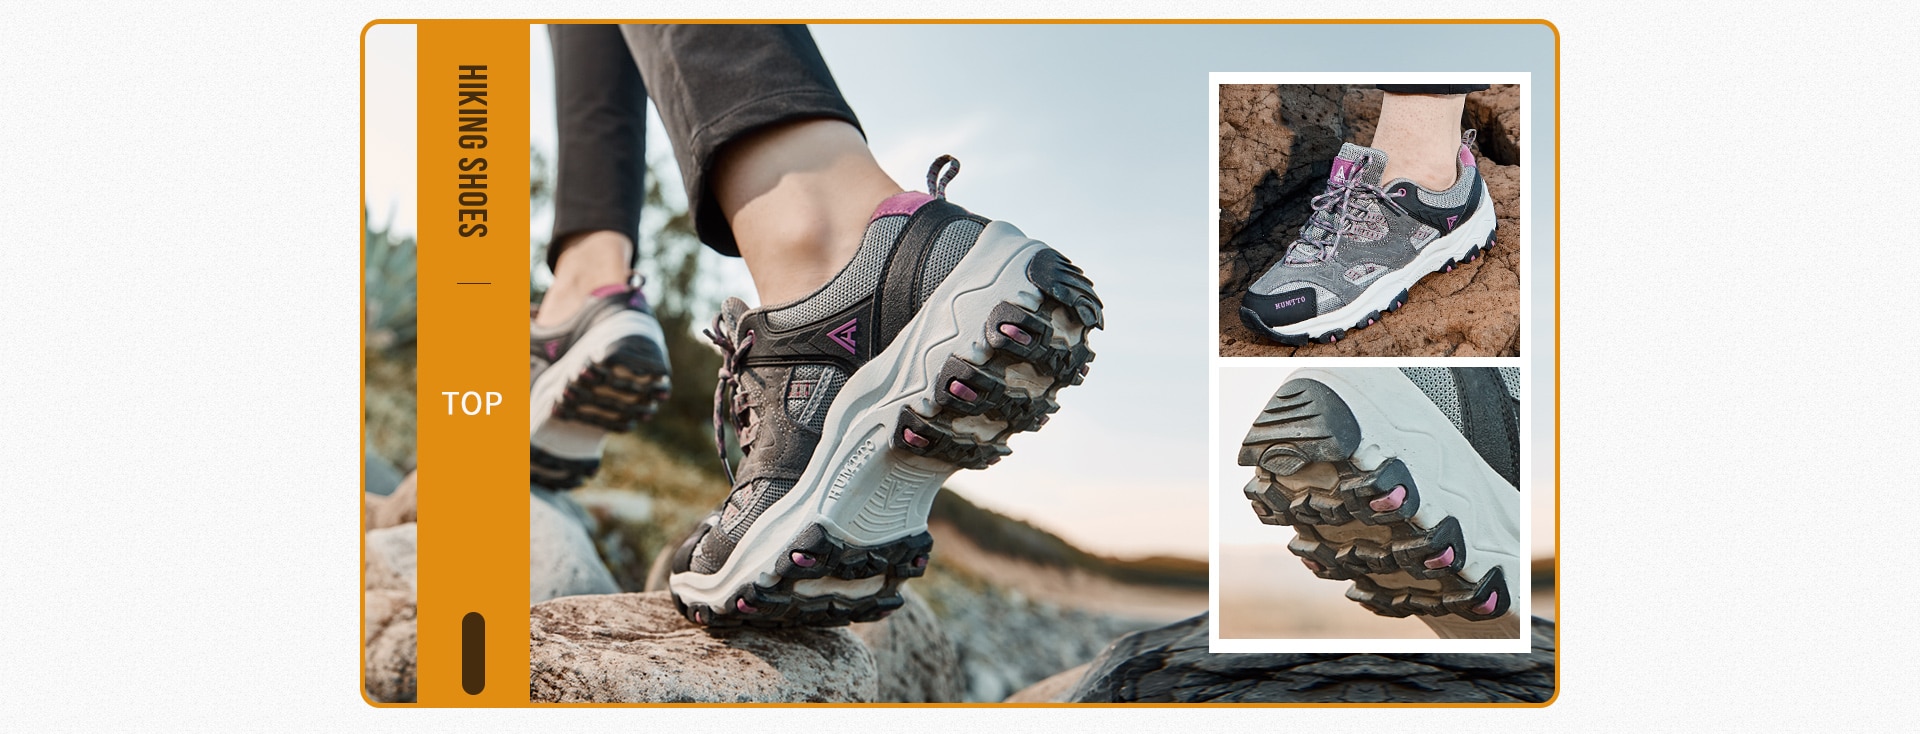 Humtto-hiking shoes